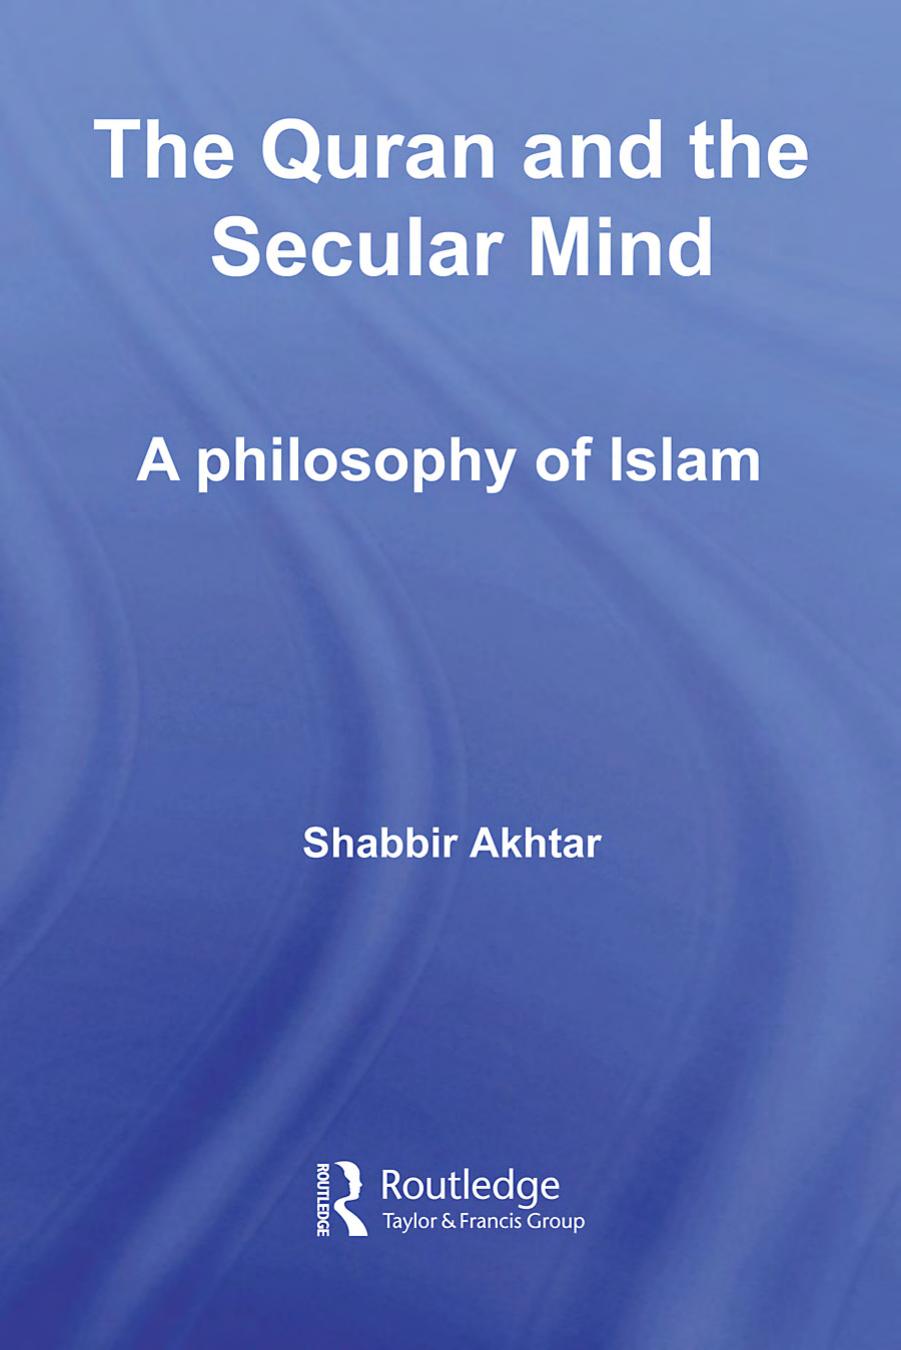 The Quran and the Secular Mind: A Philosophy of Islam